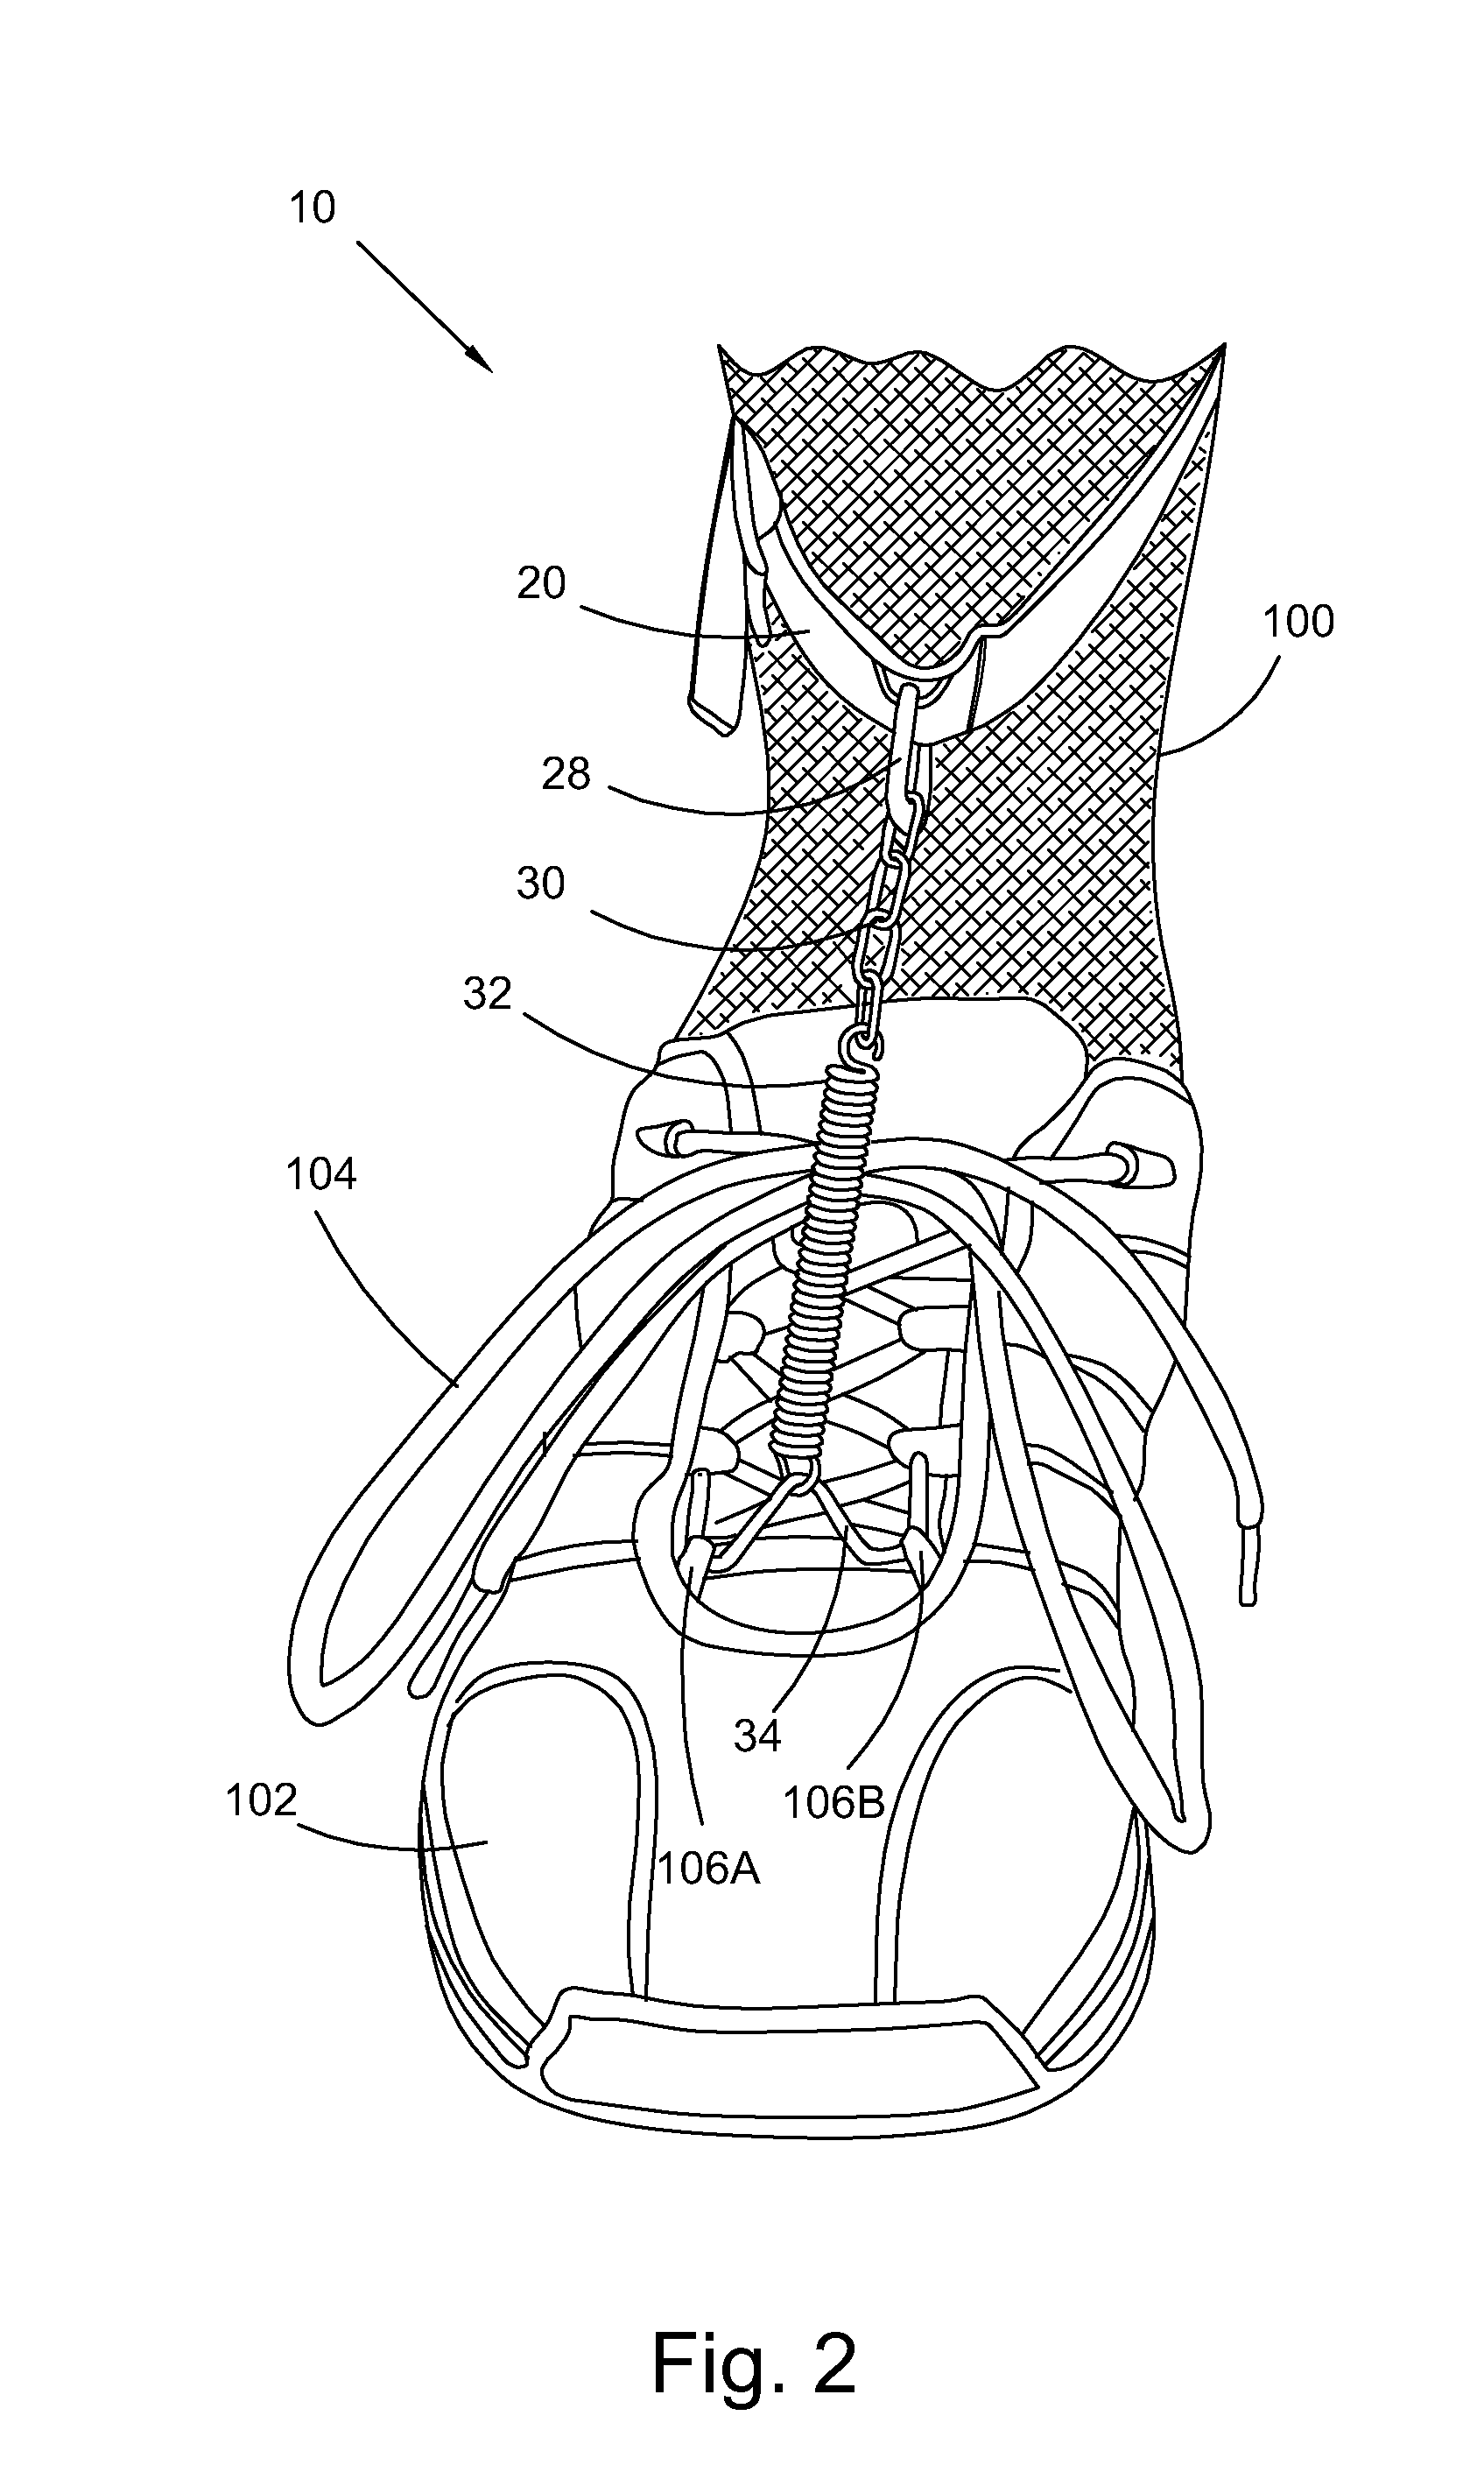 Walking device for remedying drop foot